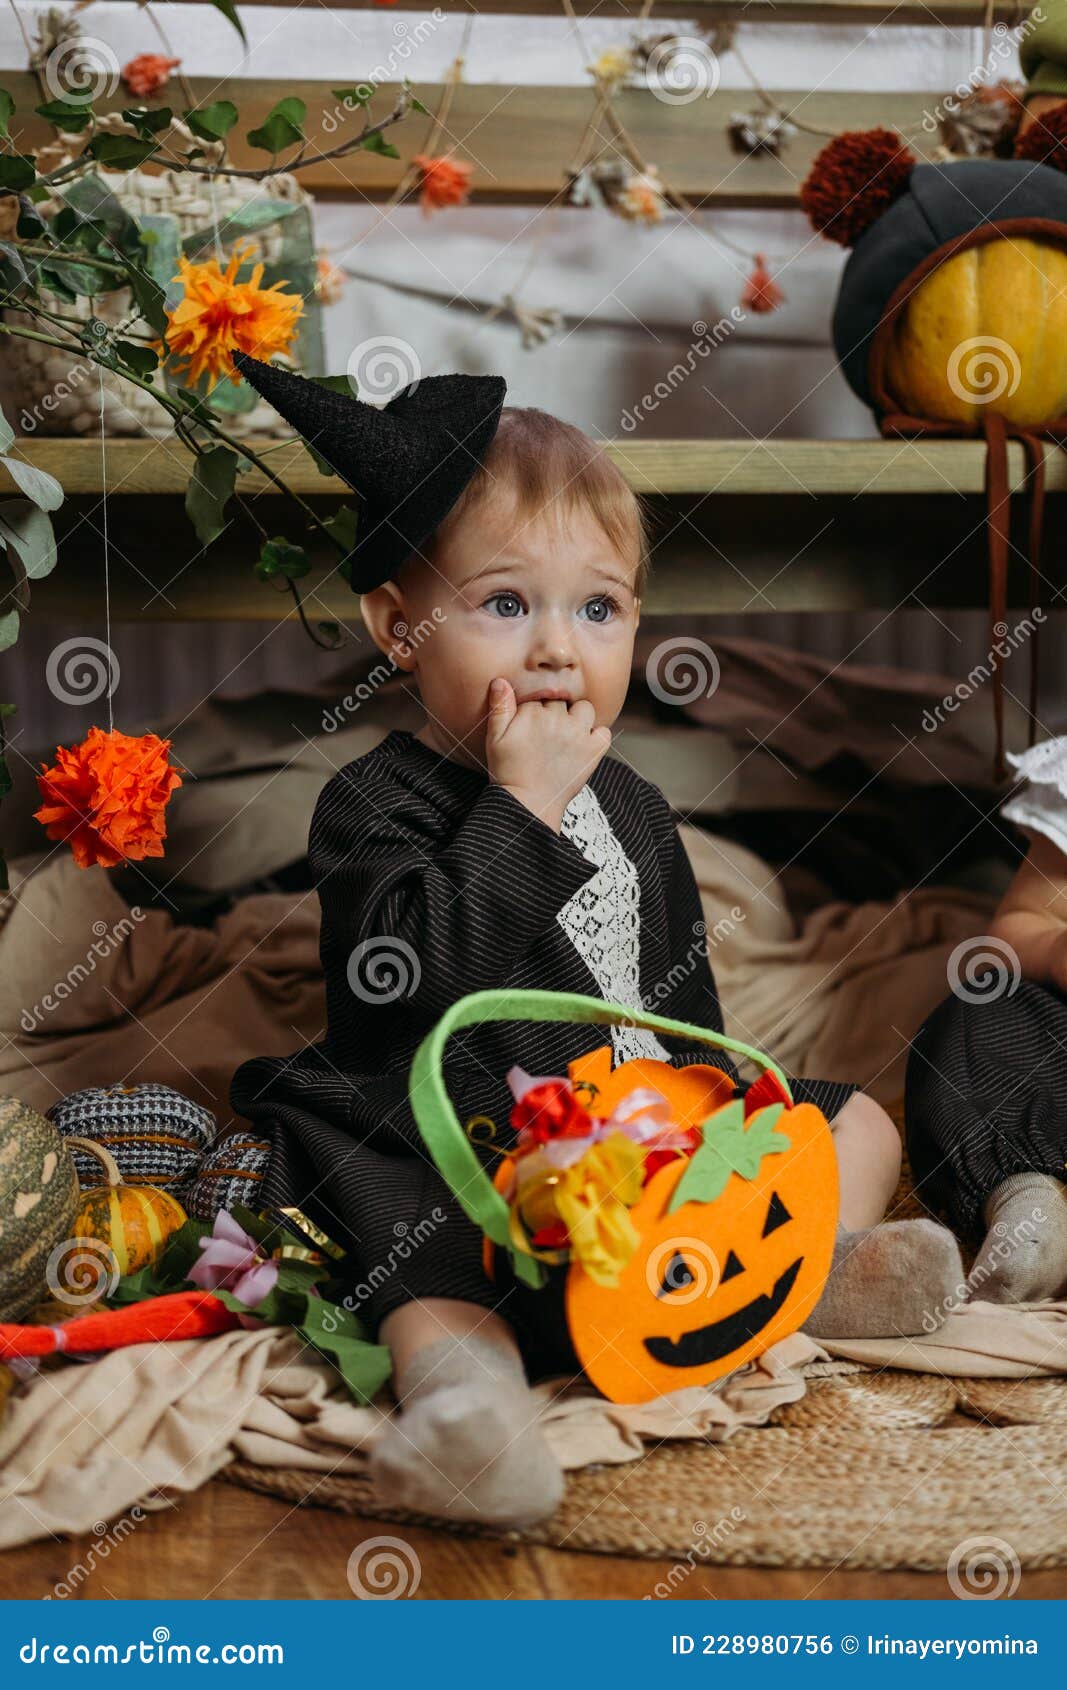 Cute Little Baby Girl Dressed in Halloween Costume Sitting on Bed with ...